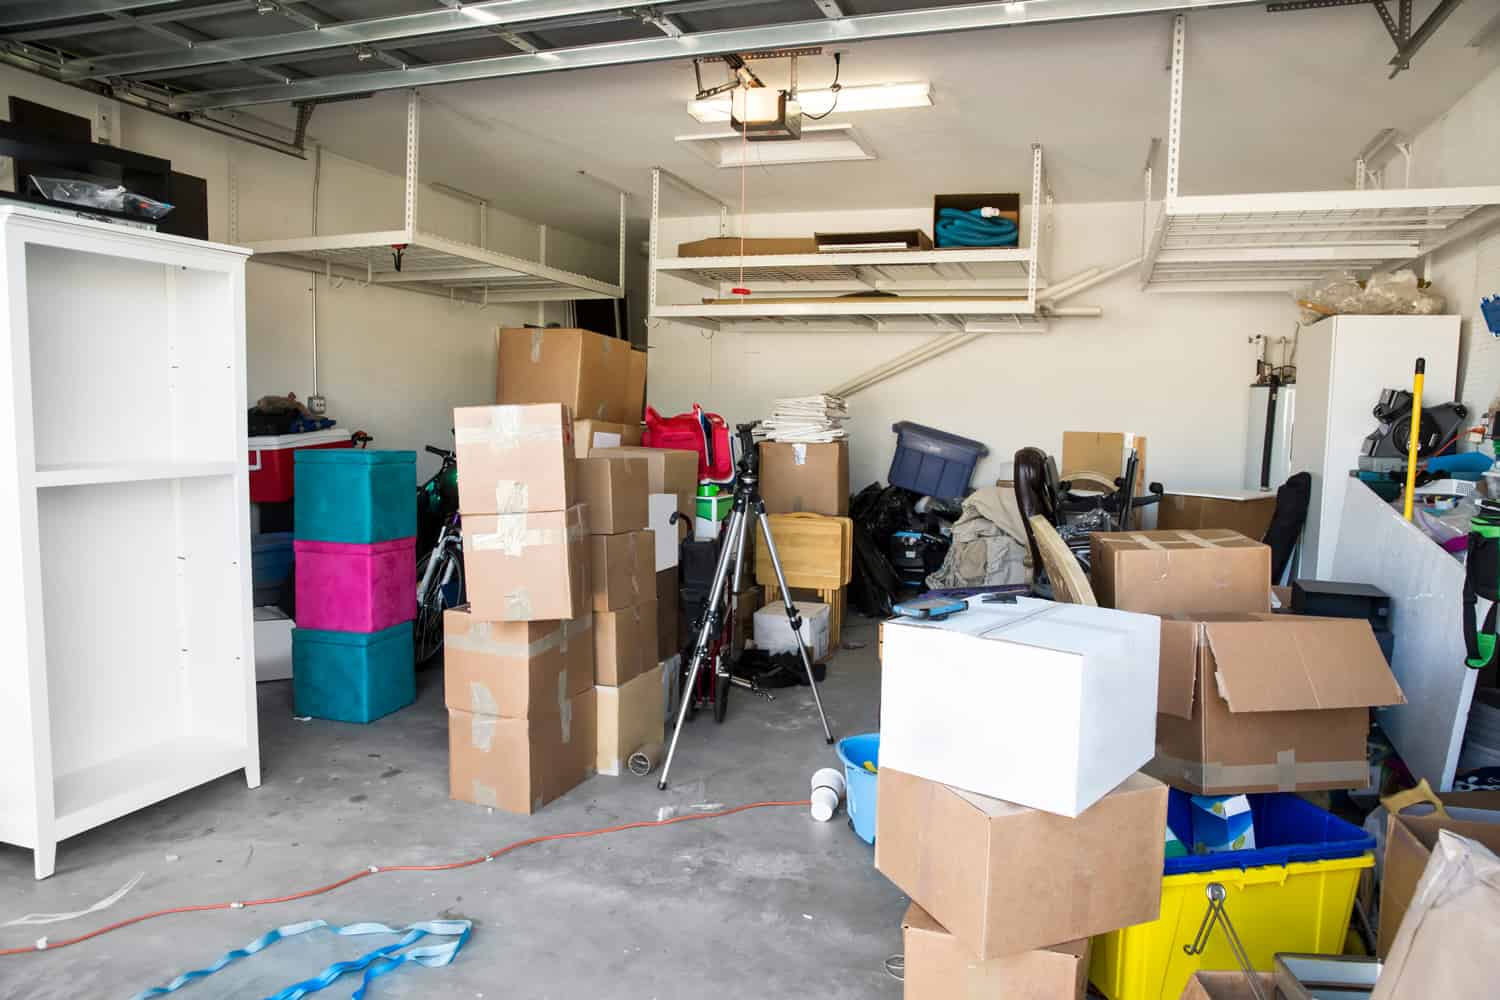 Garage full of cartons and belongings for move